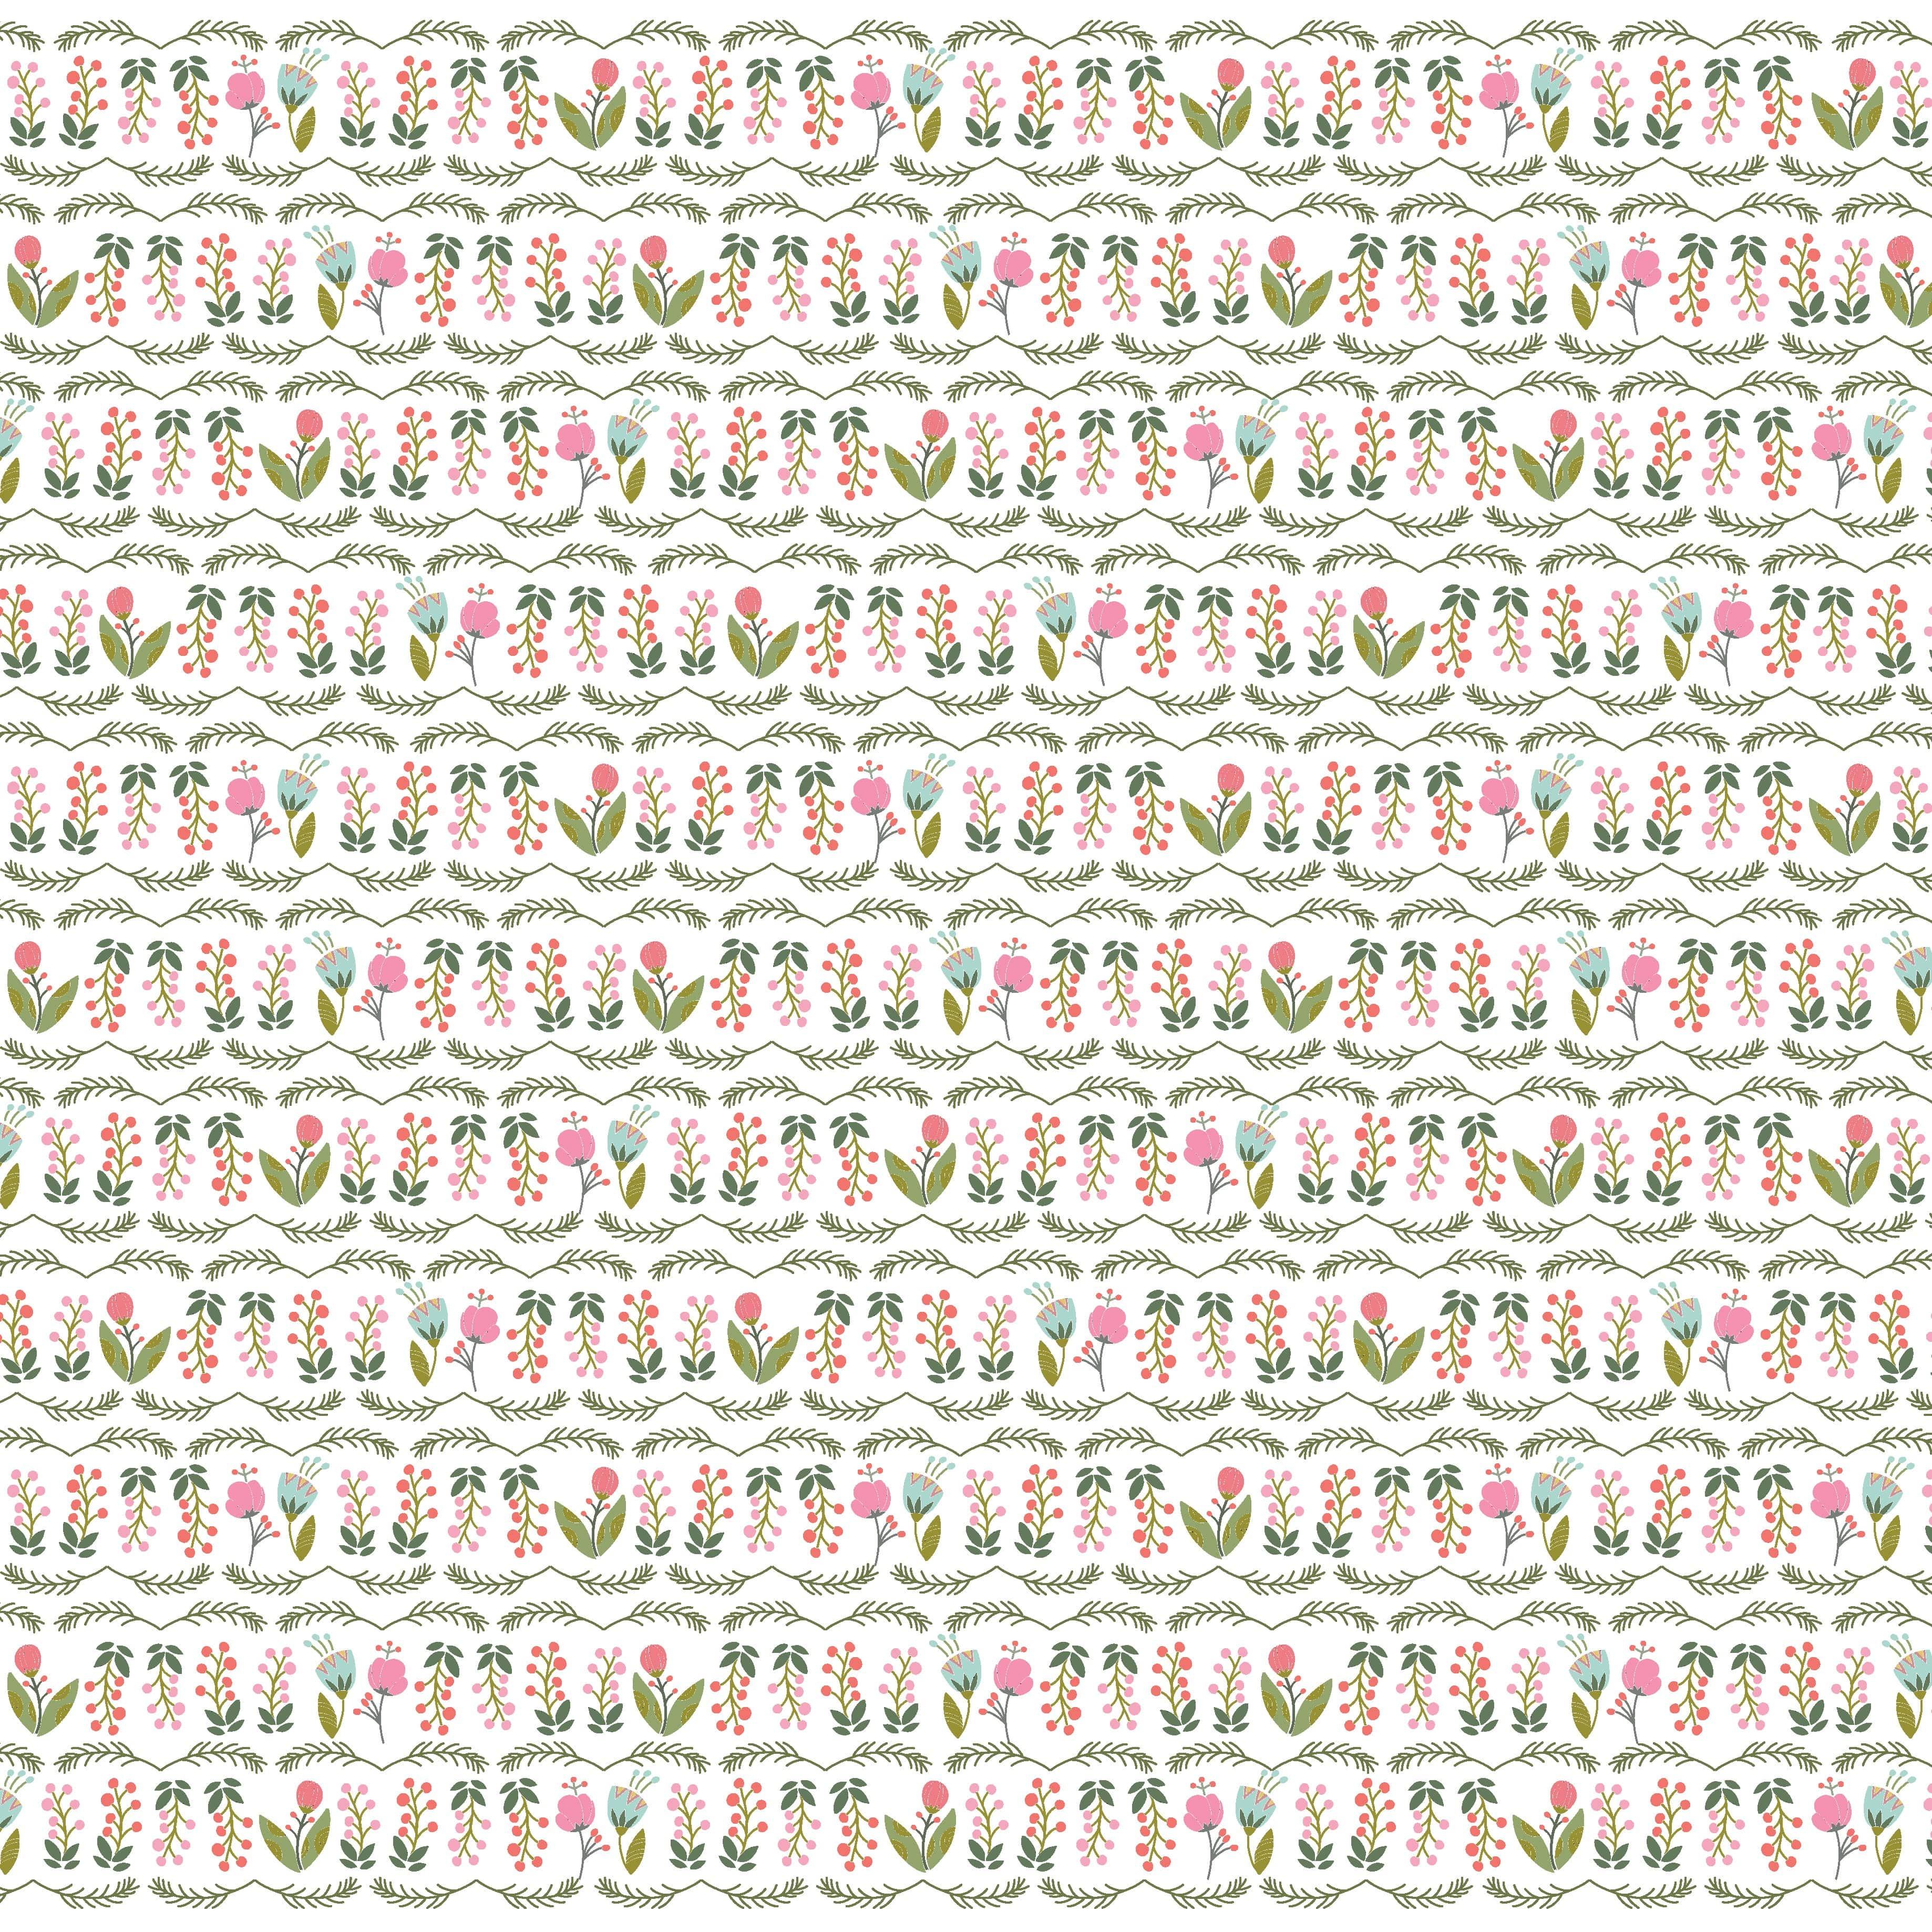 Mom Life Collection Best Mom 12 x 12 Double-Sided Scrapbook Paper by Reminisce - Scrapbook Supply Companies